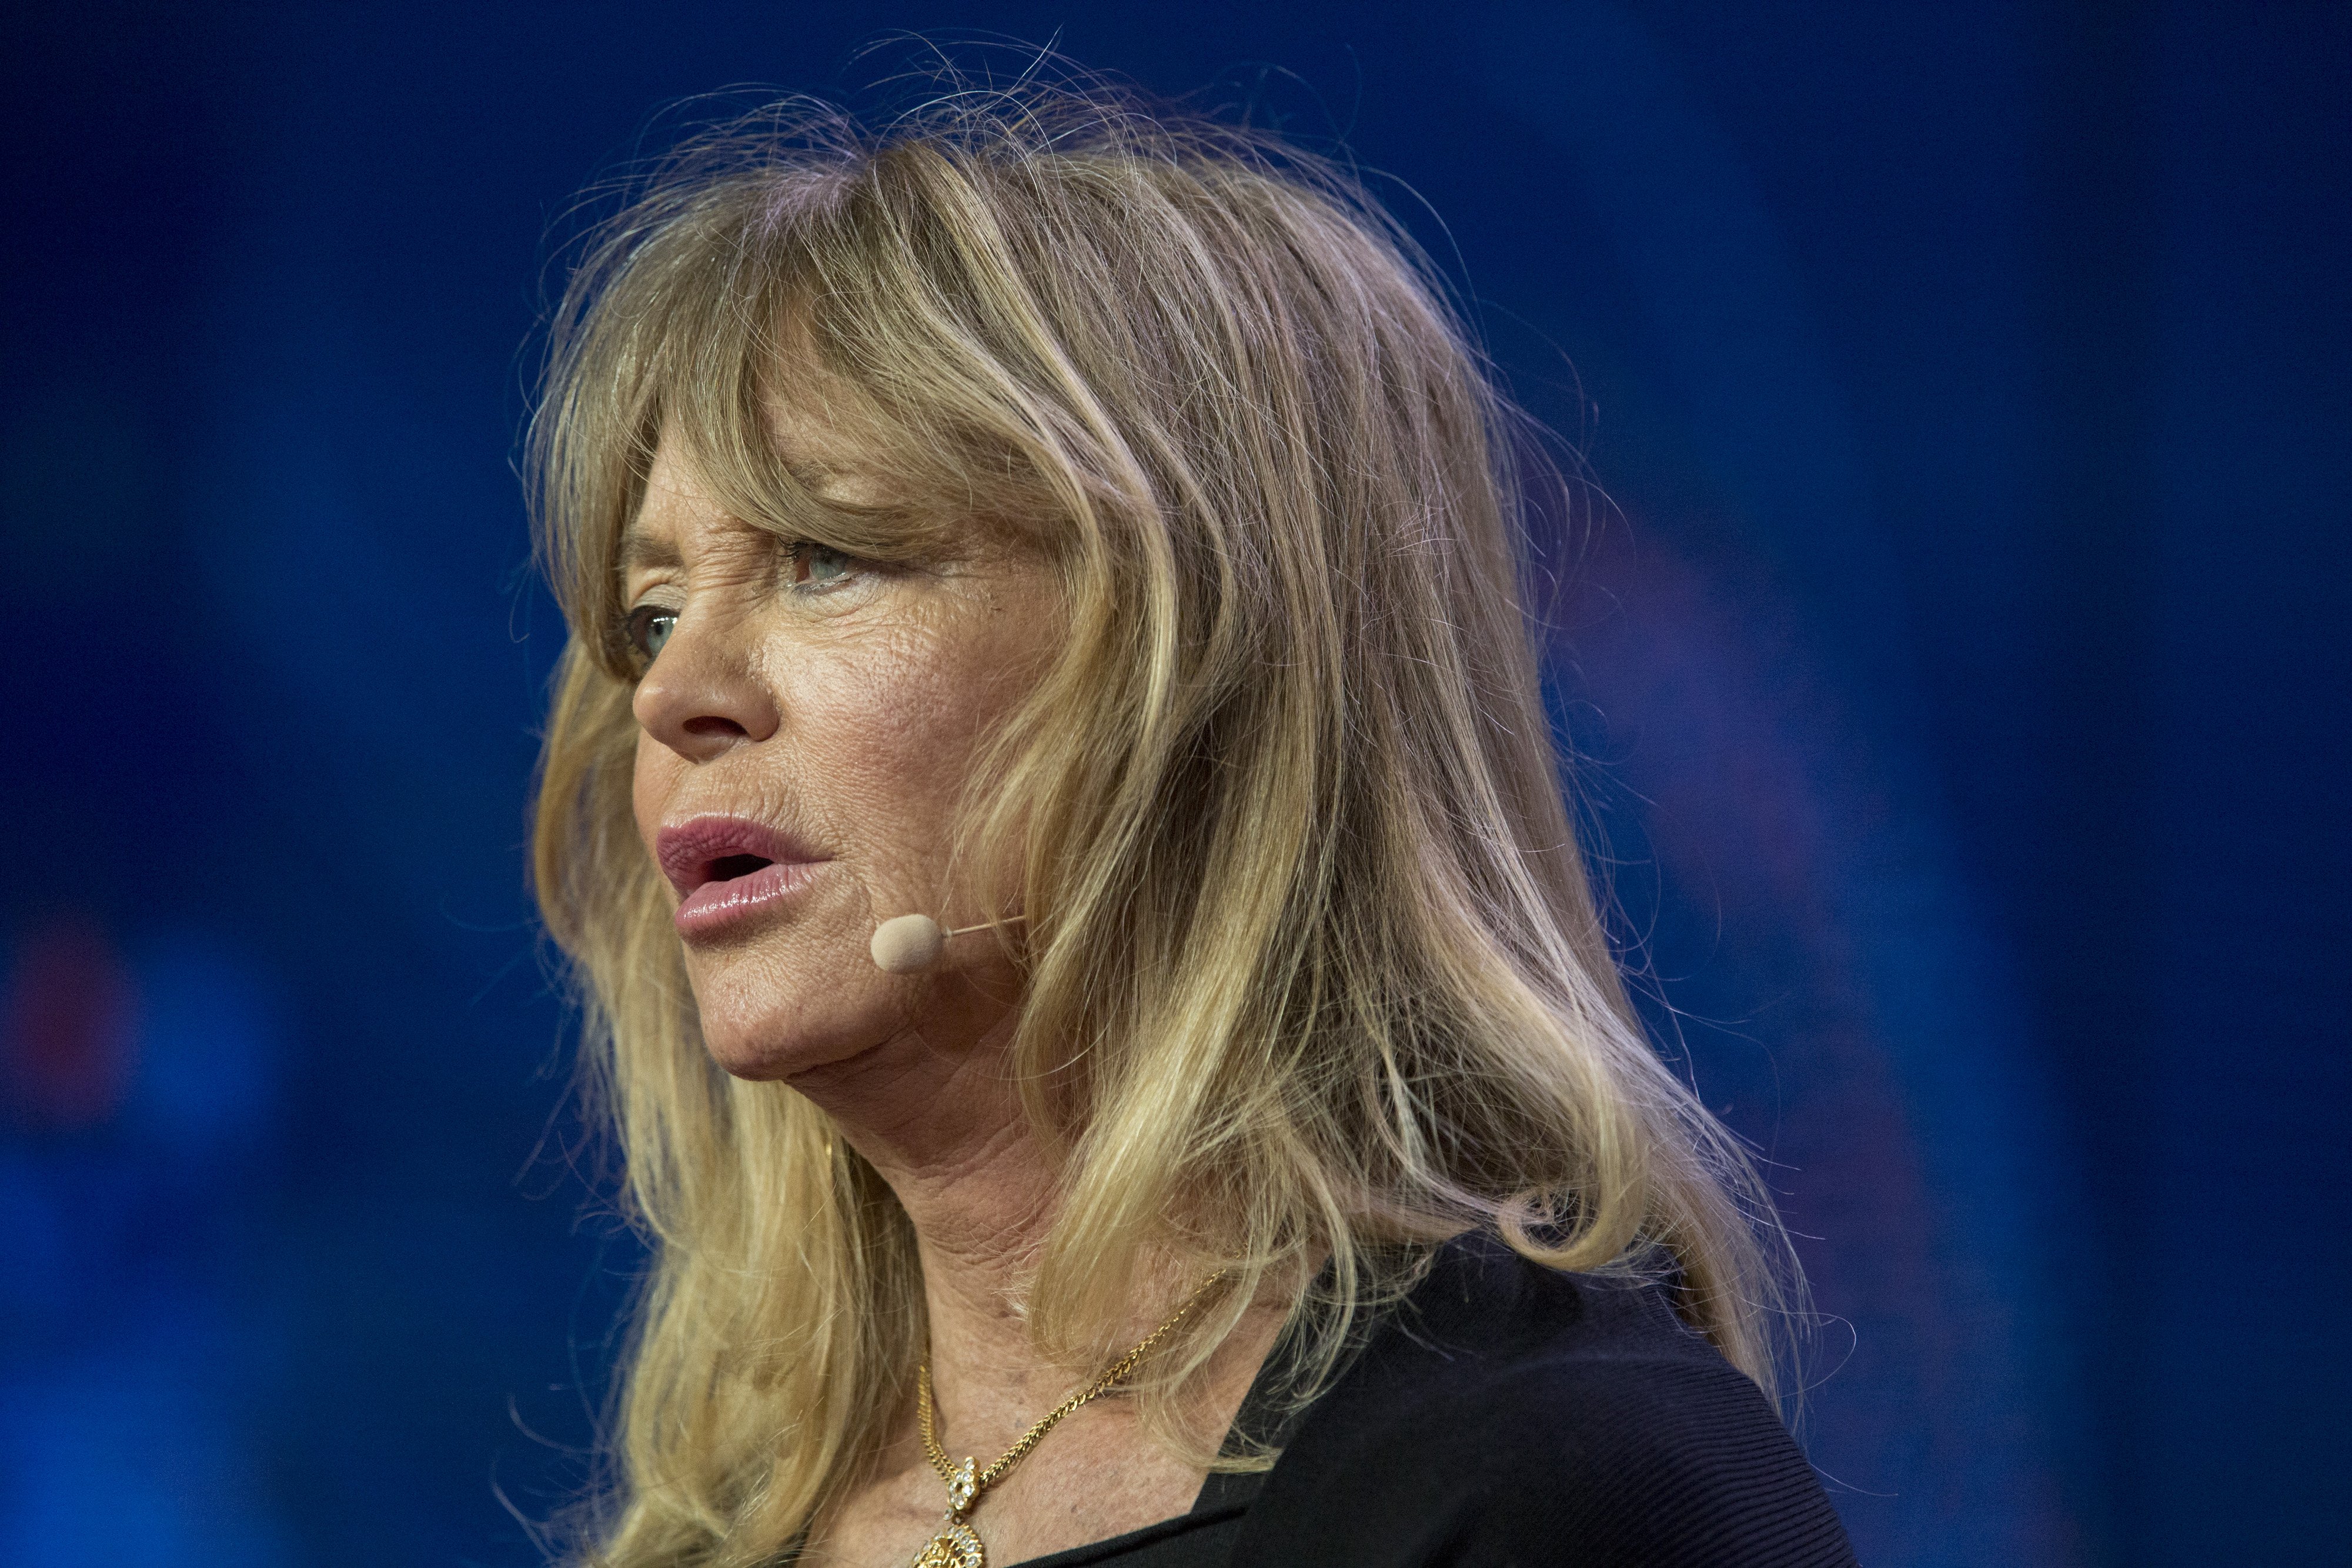 Goldie Hawn, founder of the Hawn Foundation, speaks during the Milken Institute Global Conference on May 1, 2018 in Beverly Hills, California | Photo: Getty Images